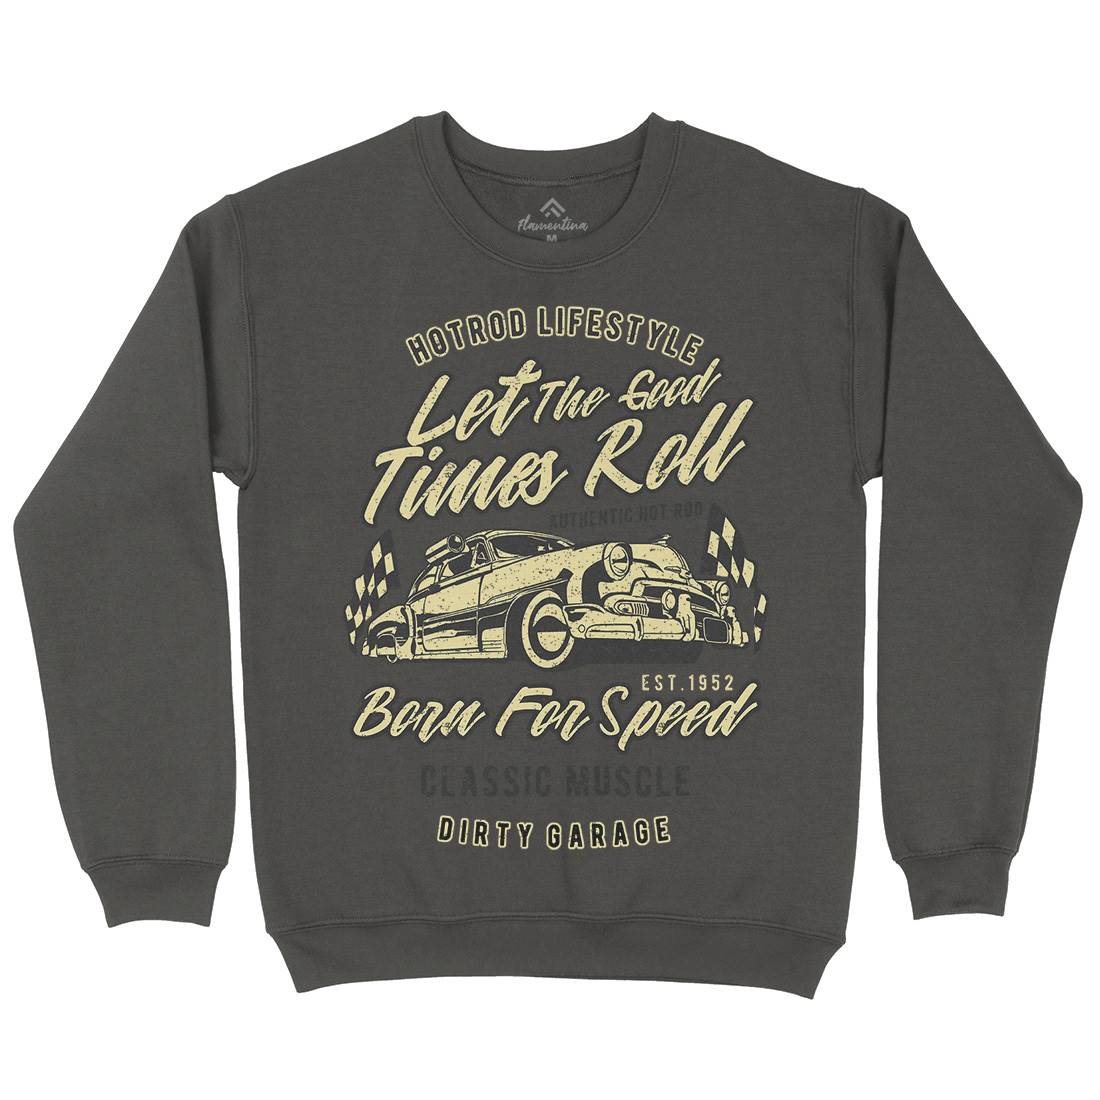 Let The Good Times Roll Kids Crew Neck Sweatshirt Cars A705